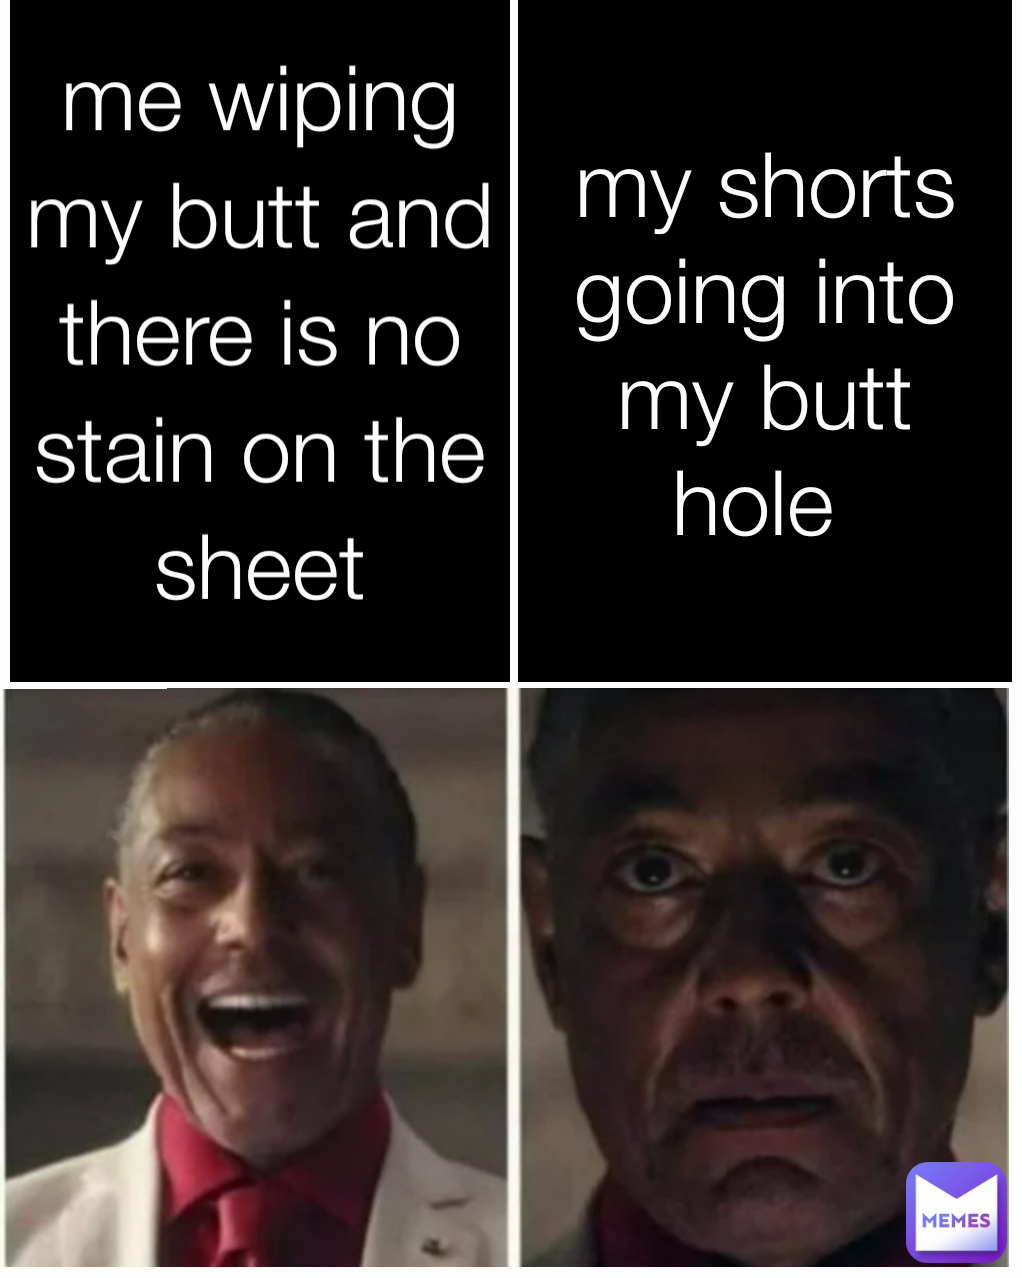 me wiping my butt and there is no stain on the sheet my shorts going into my butt hole 